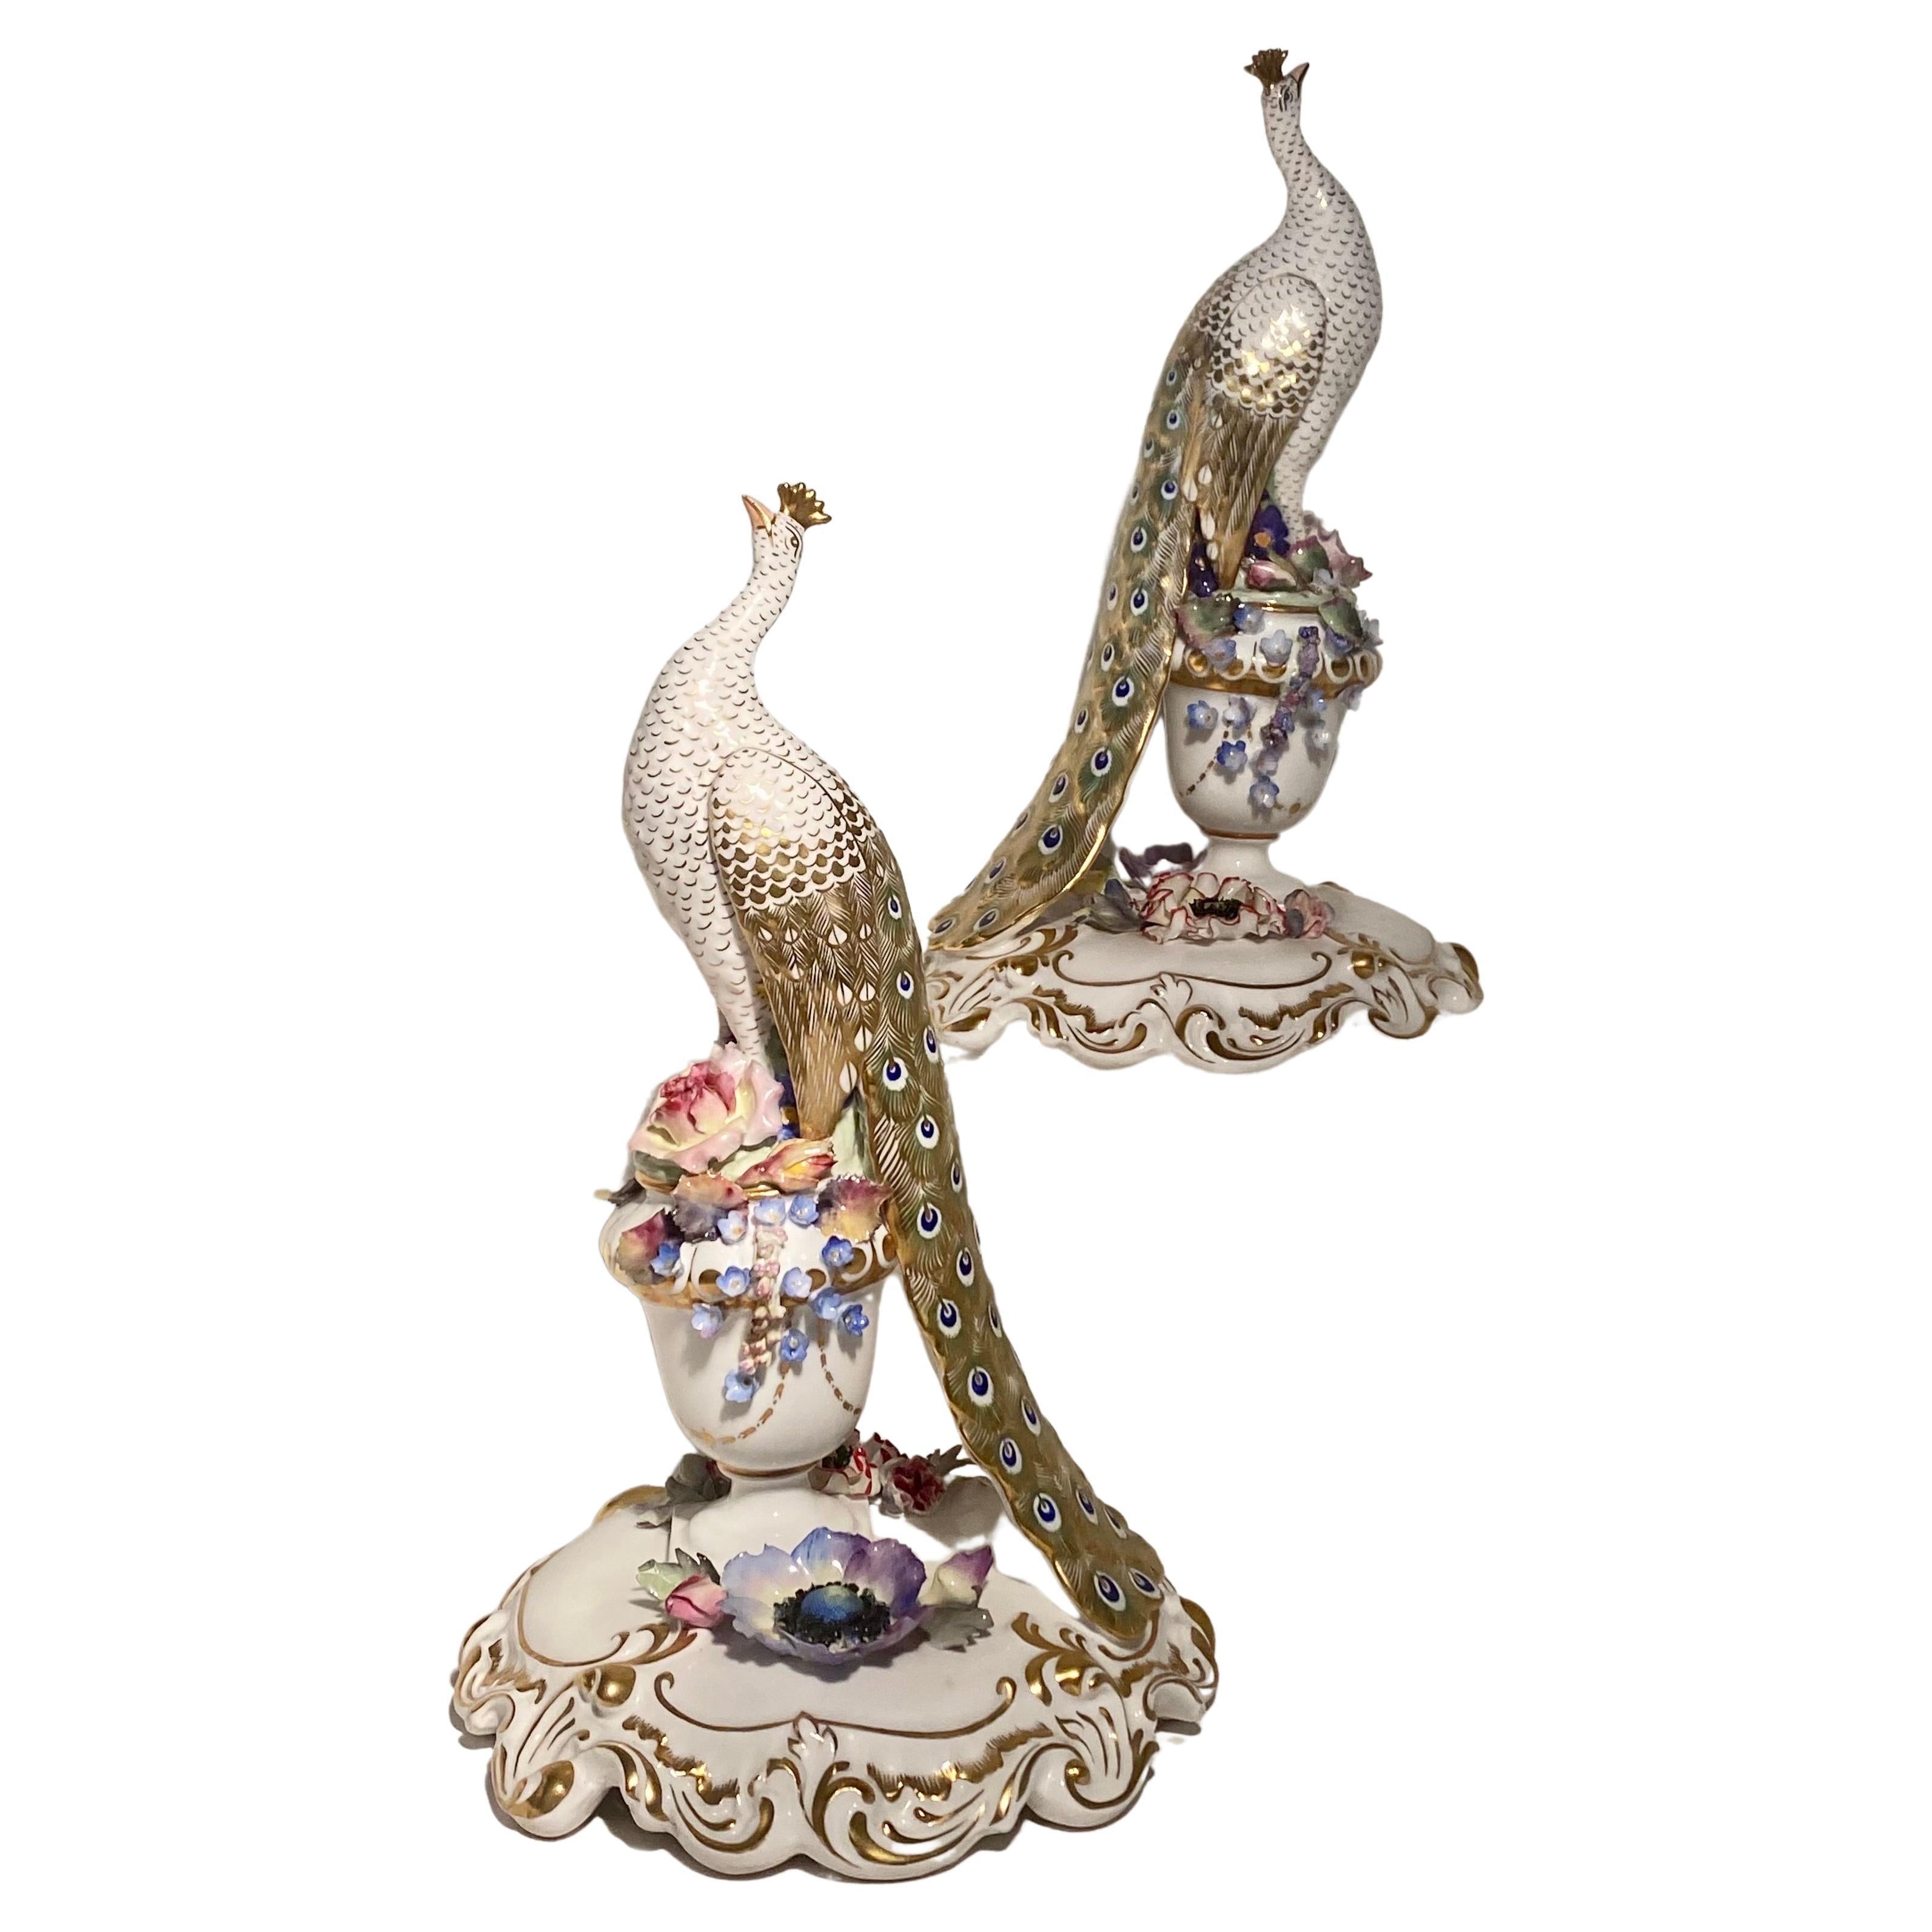 Here is a stunningly lovely pair of peacocks made by Royal. Crown Derby with the marks indicating they were made in the 1960s. Each bird is entirely handmade and bear the artists named on the bases. They are so delicate. The birds on pedestal is